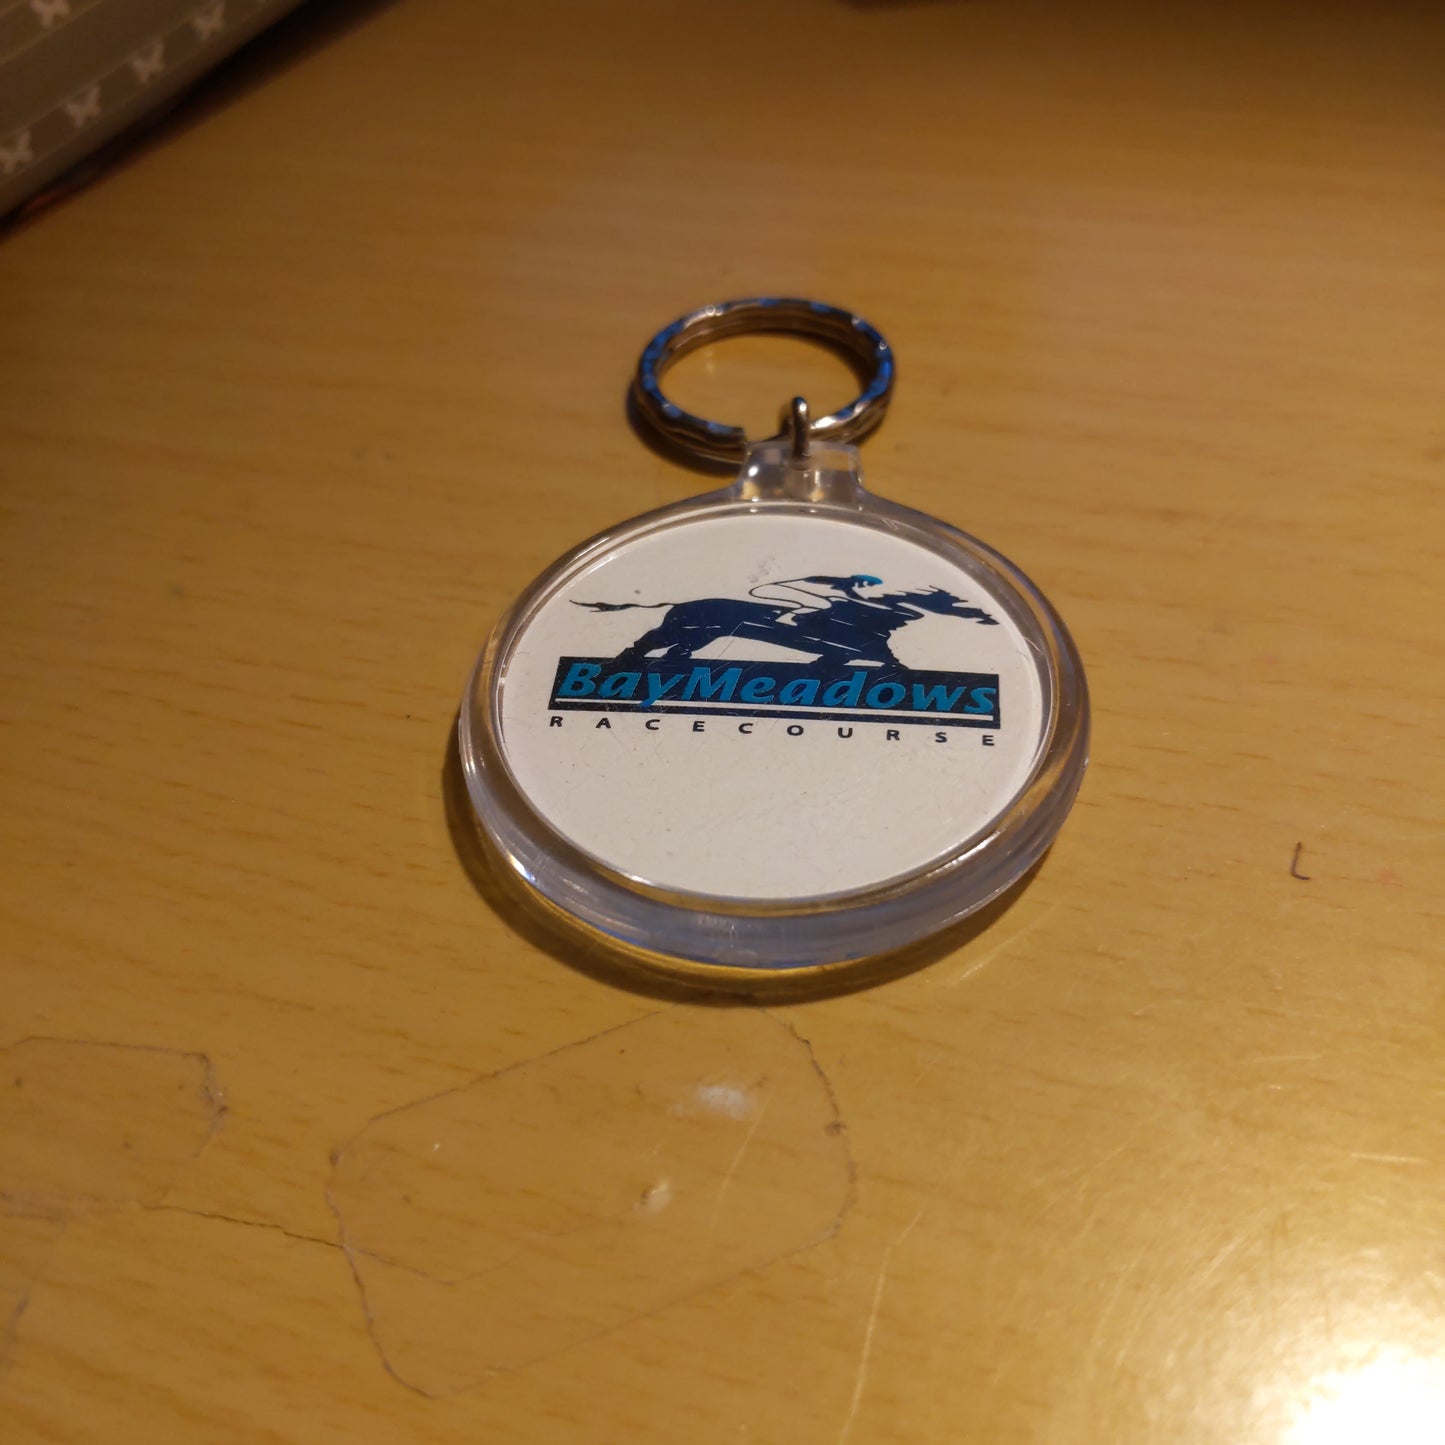 Vintage Key Chain of Bay Meadows race track